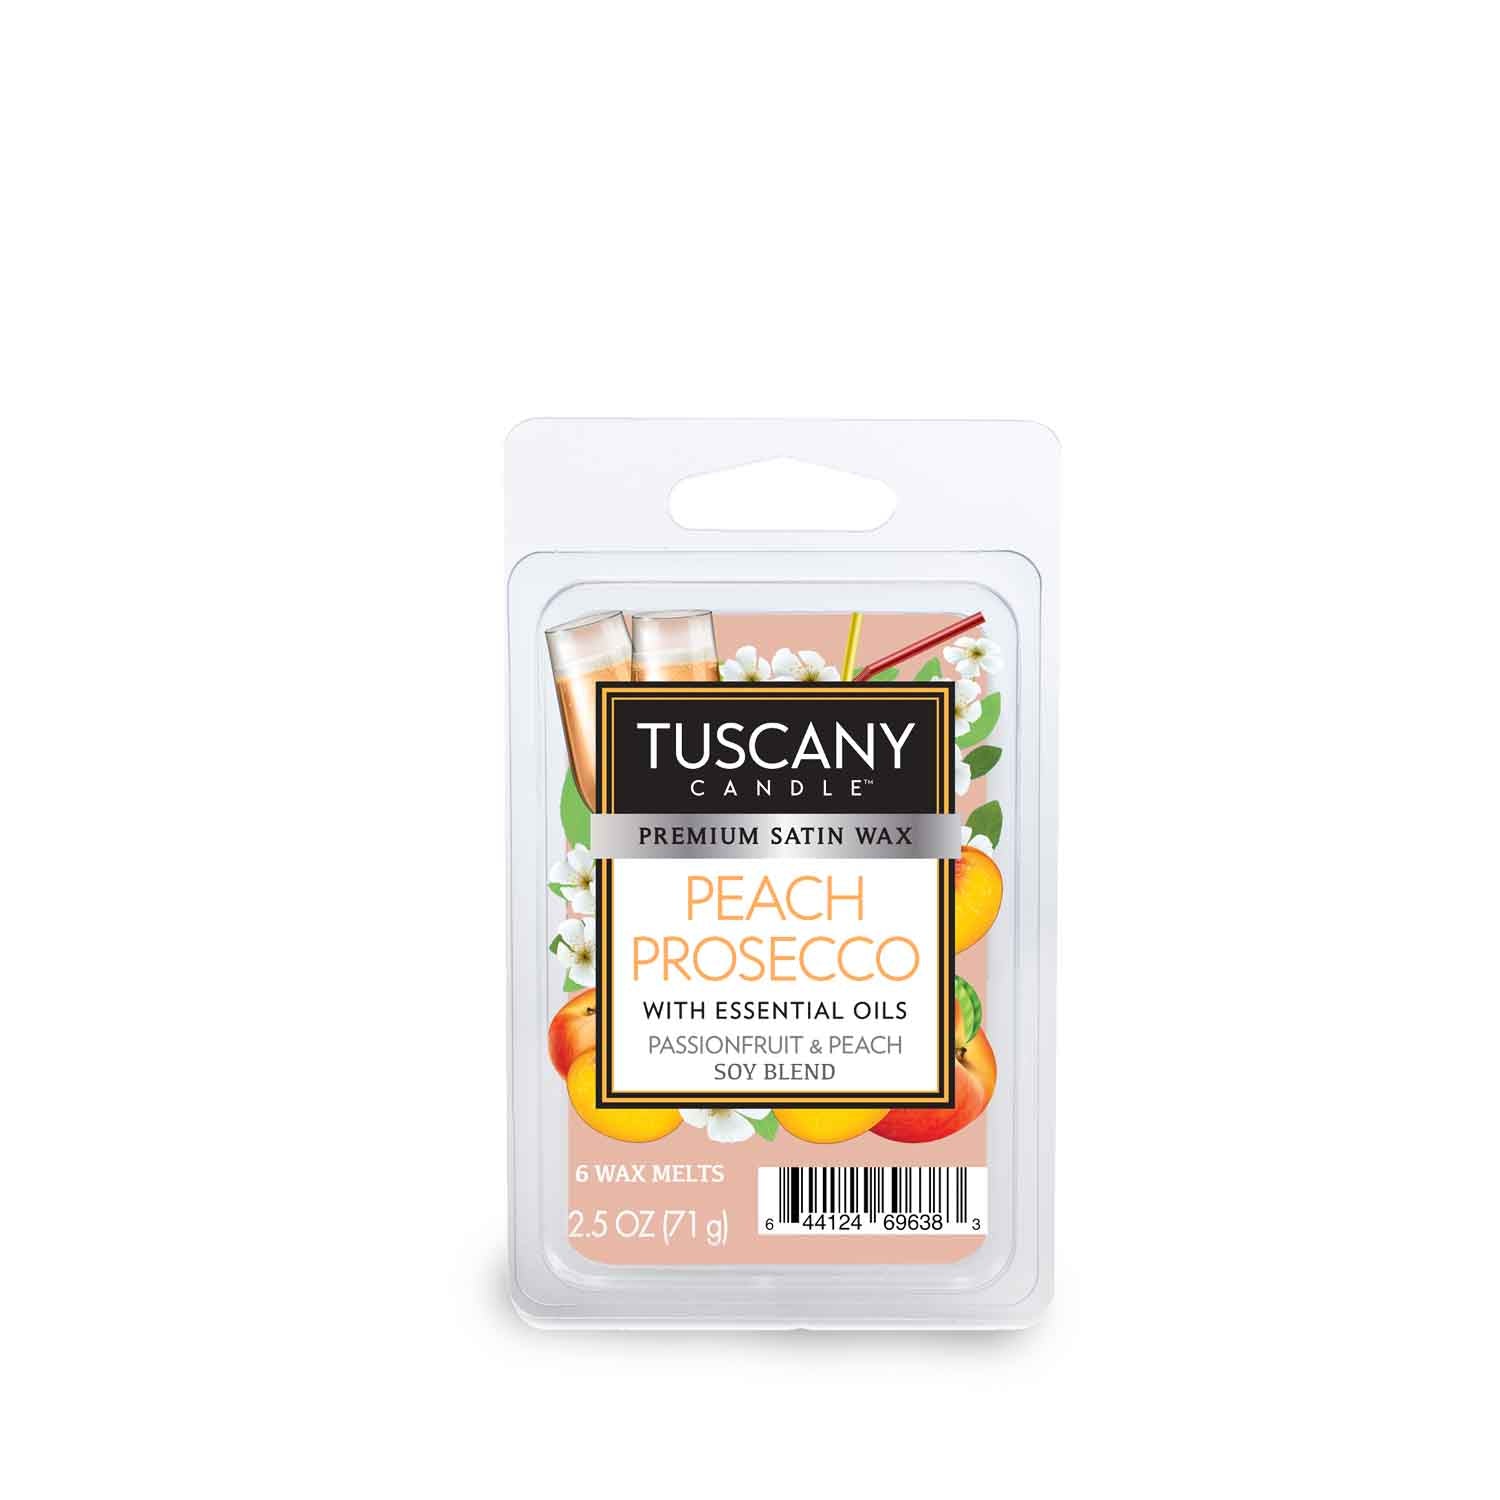 Tuscany Candle® Peach Prosecco scented wax melt (2.5 oz) bar.